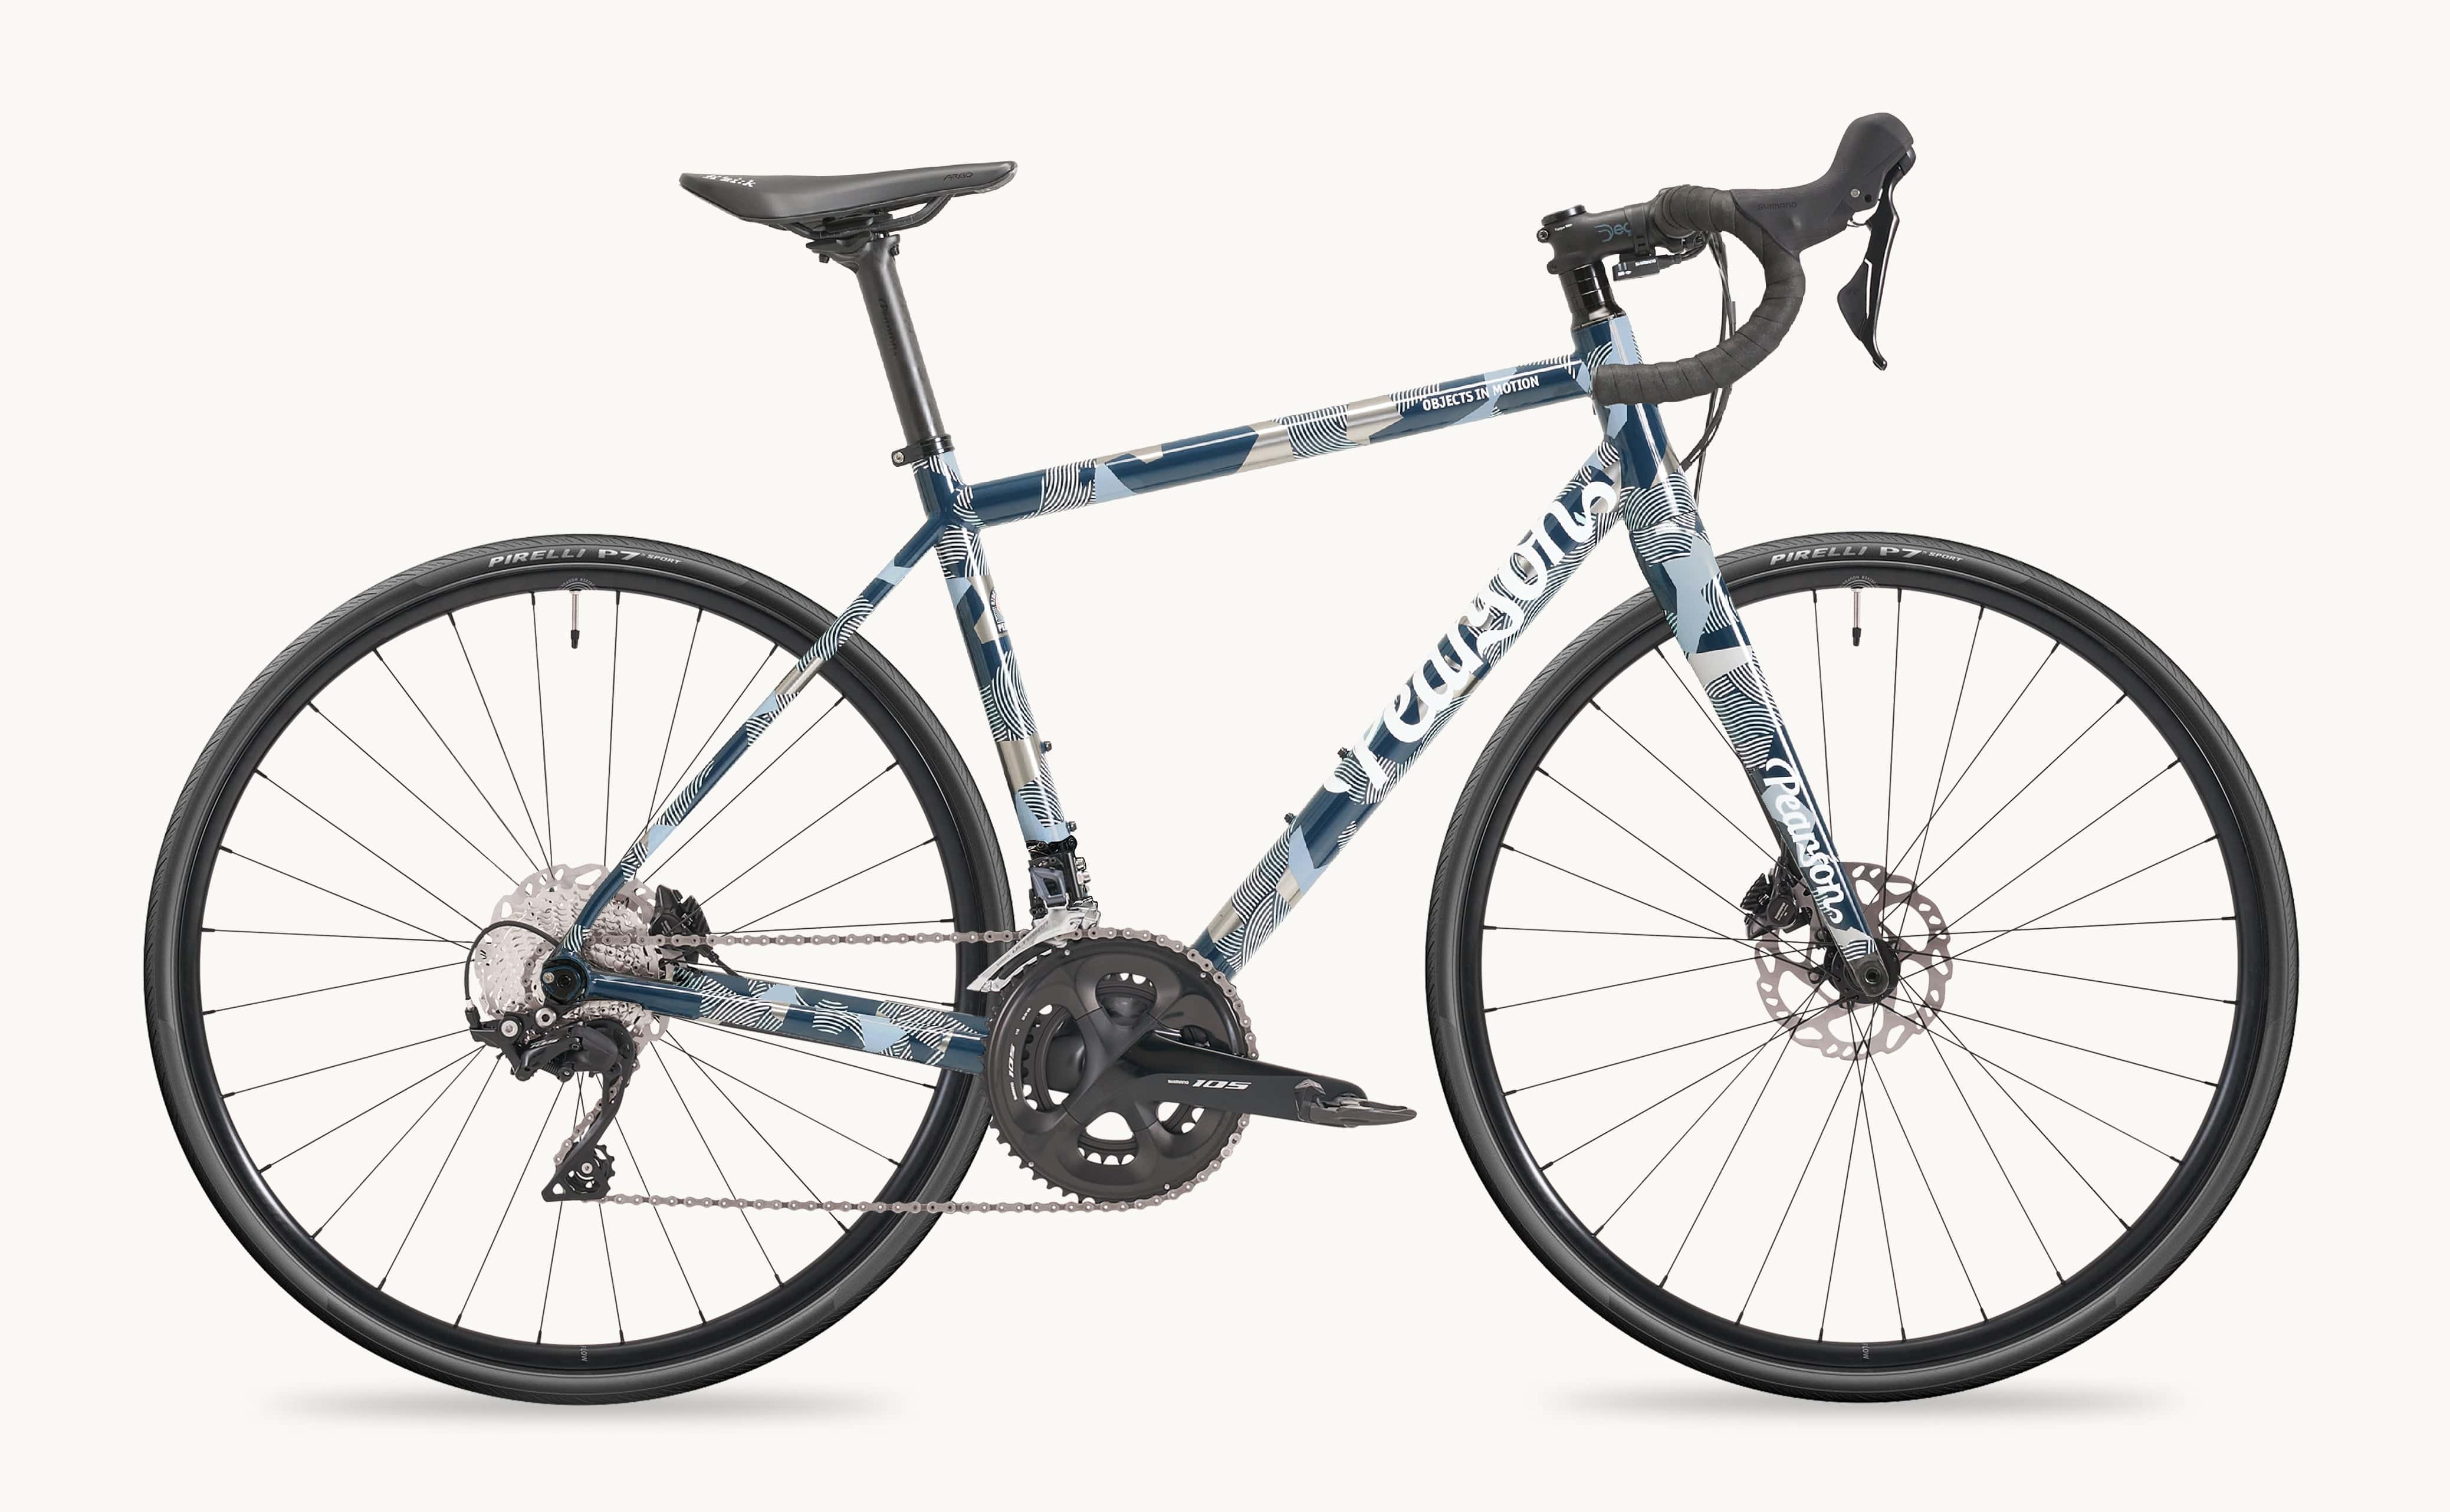 Pcs  Special Offer: Objects In Motion Shimano 105 - Titanium Road Bike  Large / Blue Camo / Shimano 105 Mechanical - Pearson Ebb And Flow Alloy Wheels